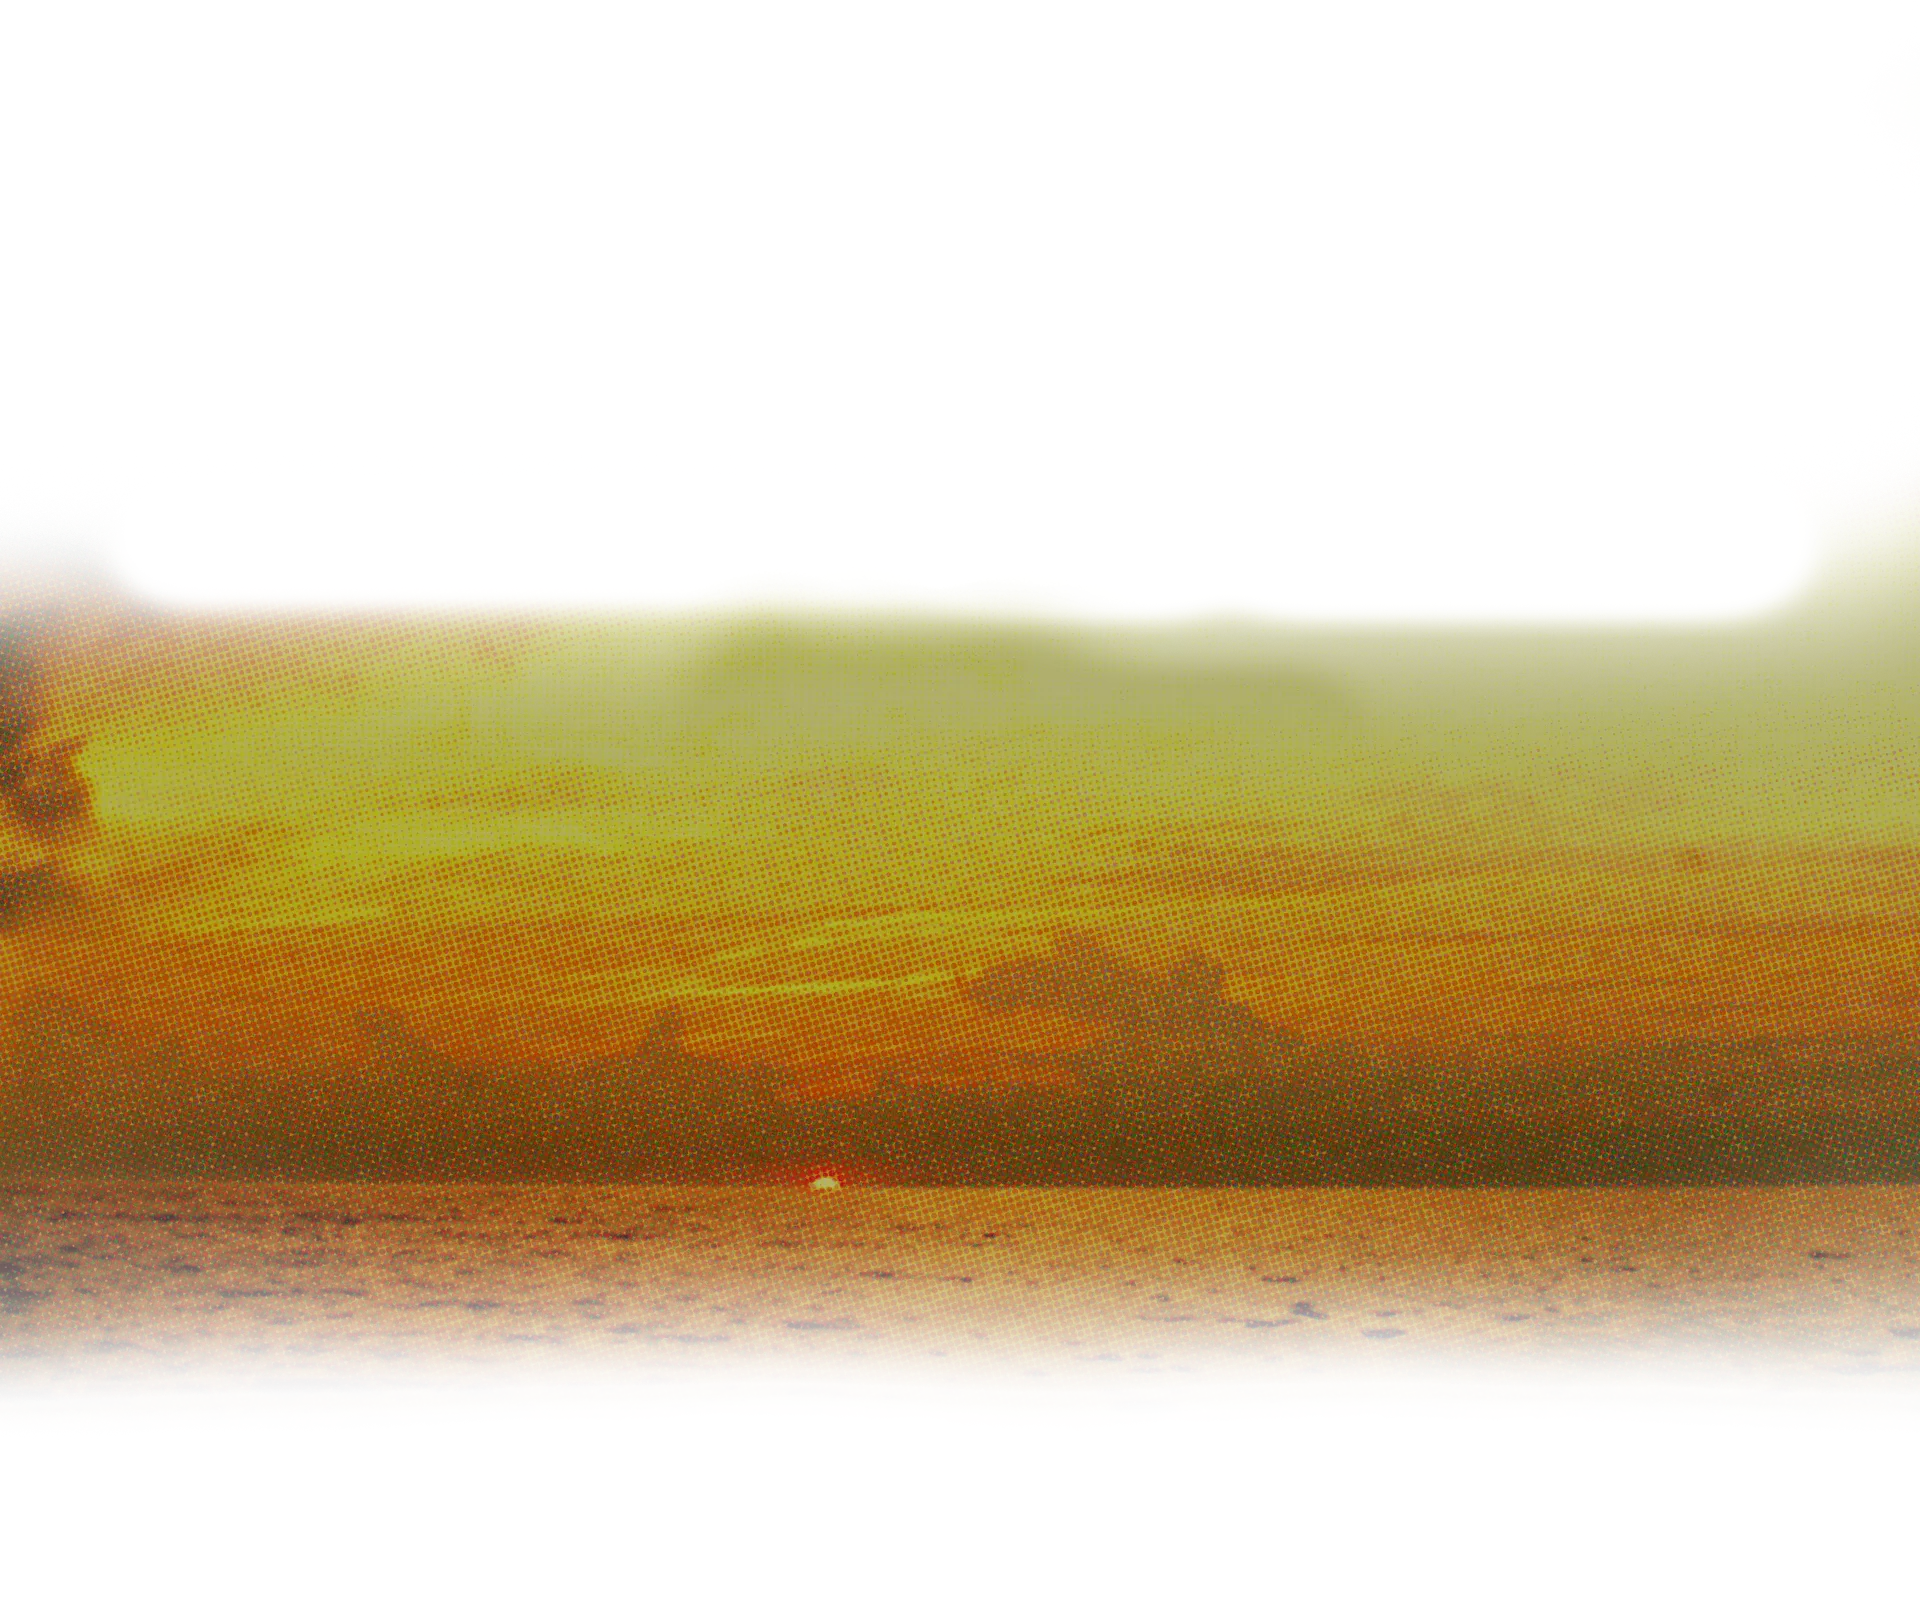 Sunset image with fade on top to reveal shoes while scrolling